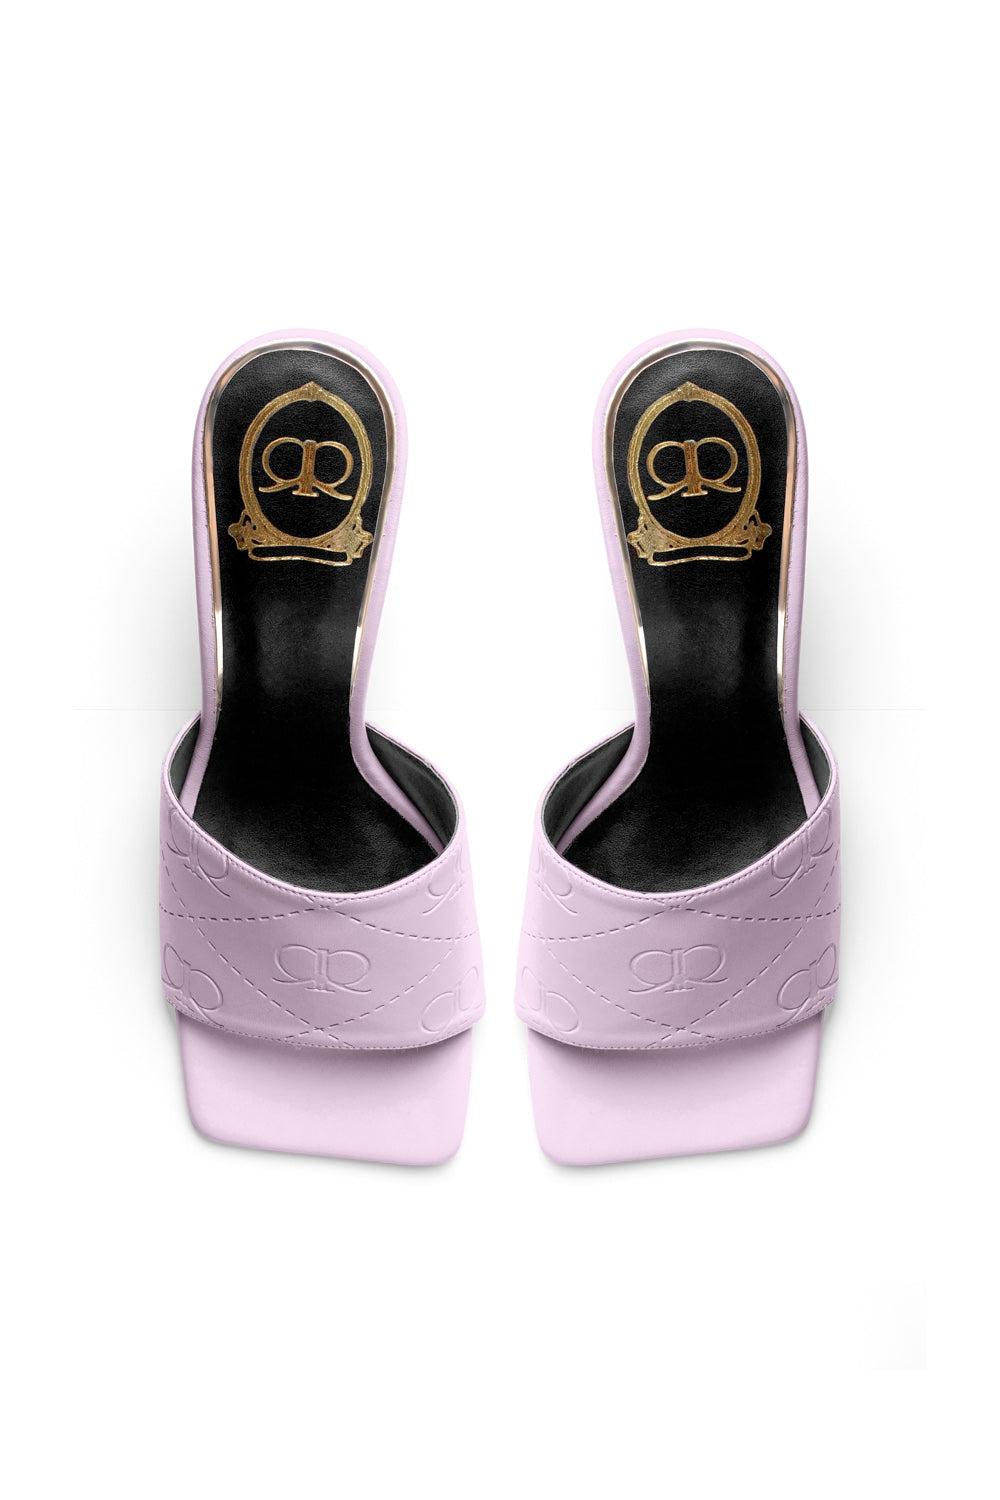 RR Mules in Lilac